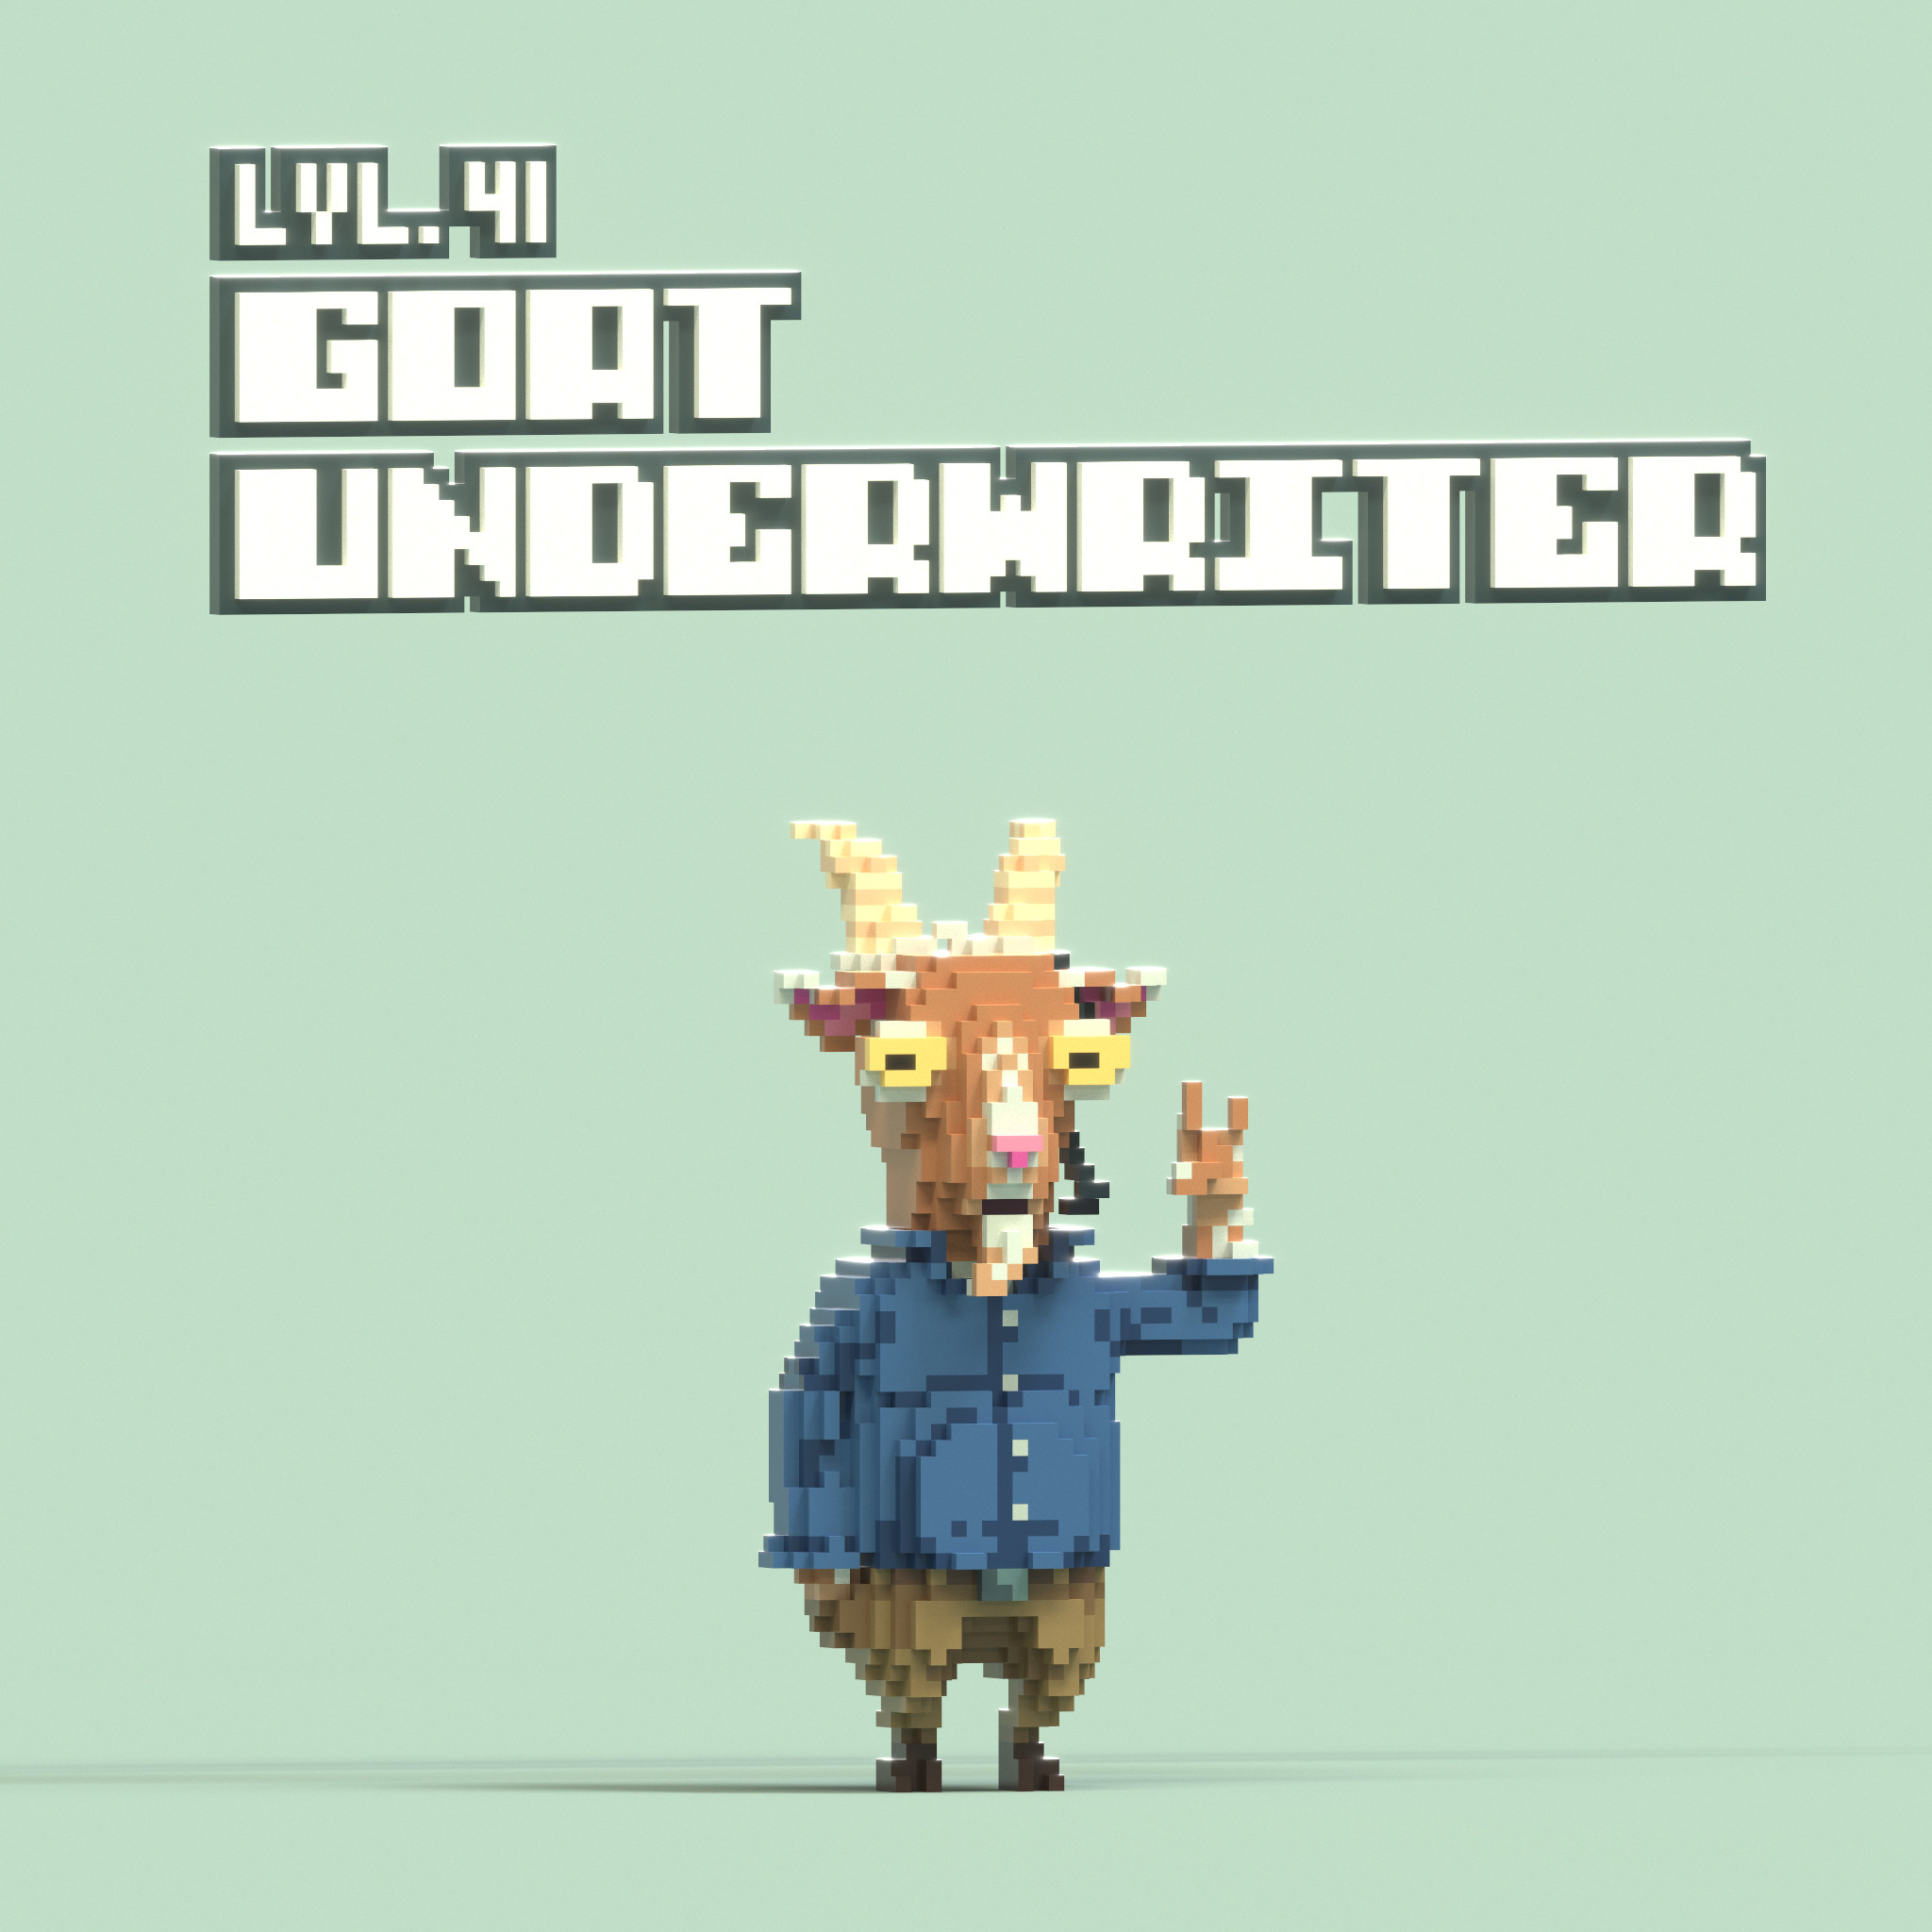 Voxel "Level 41" Goat Underwriter as created using Magicavoxel.